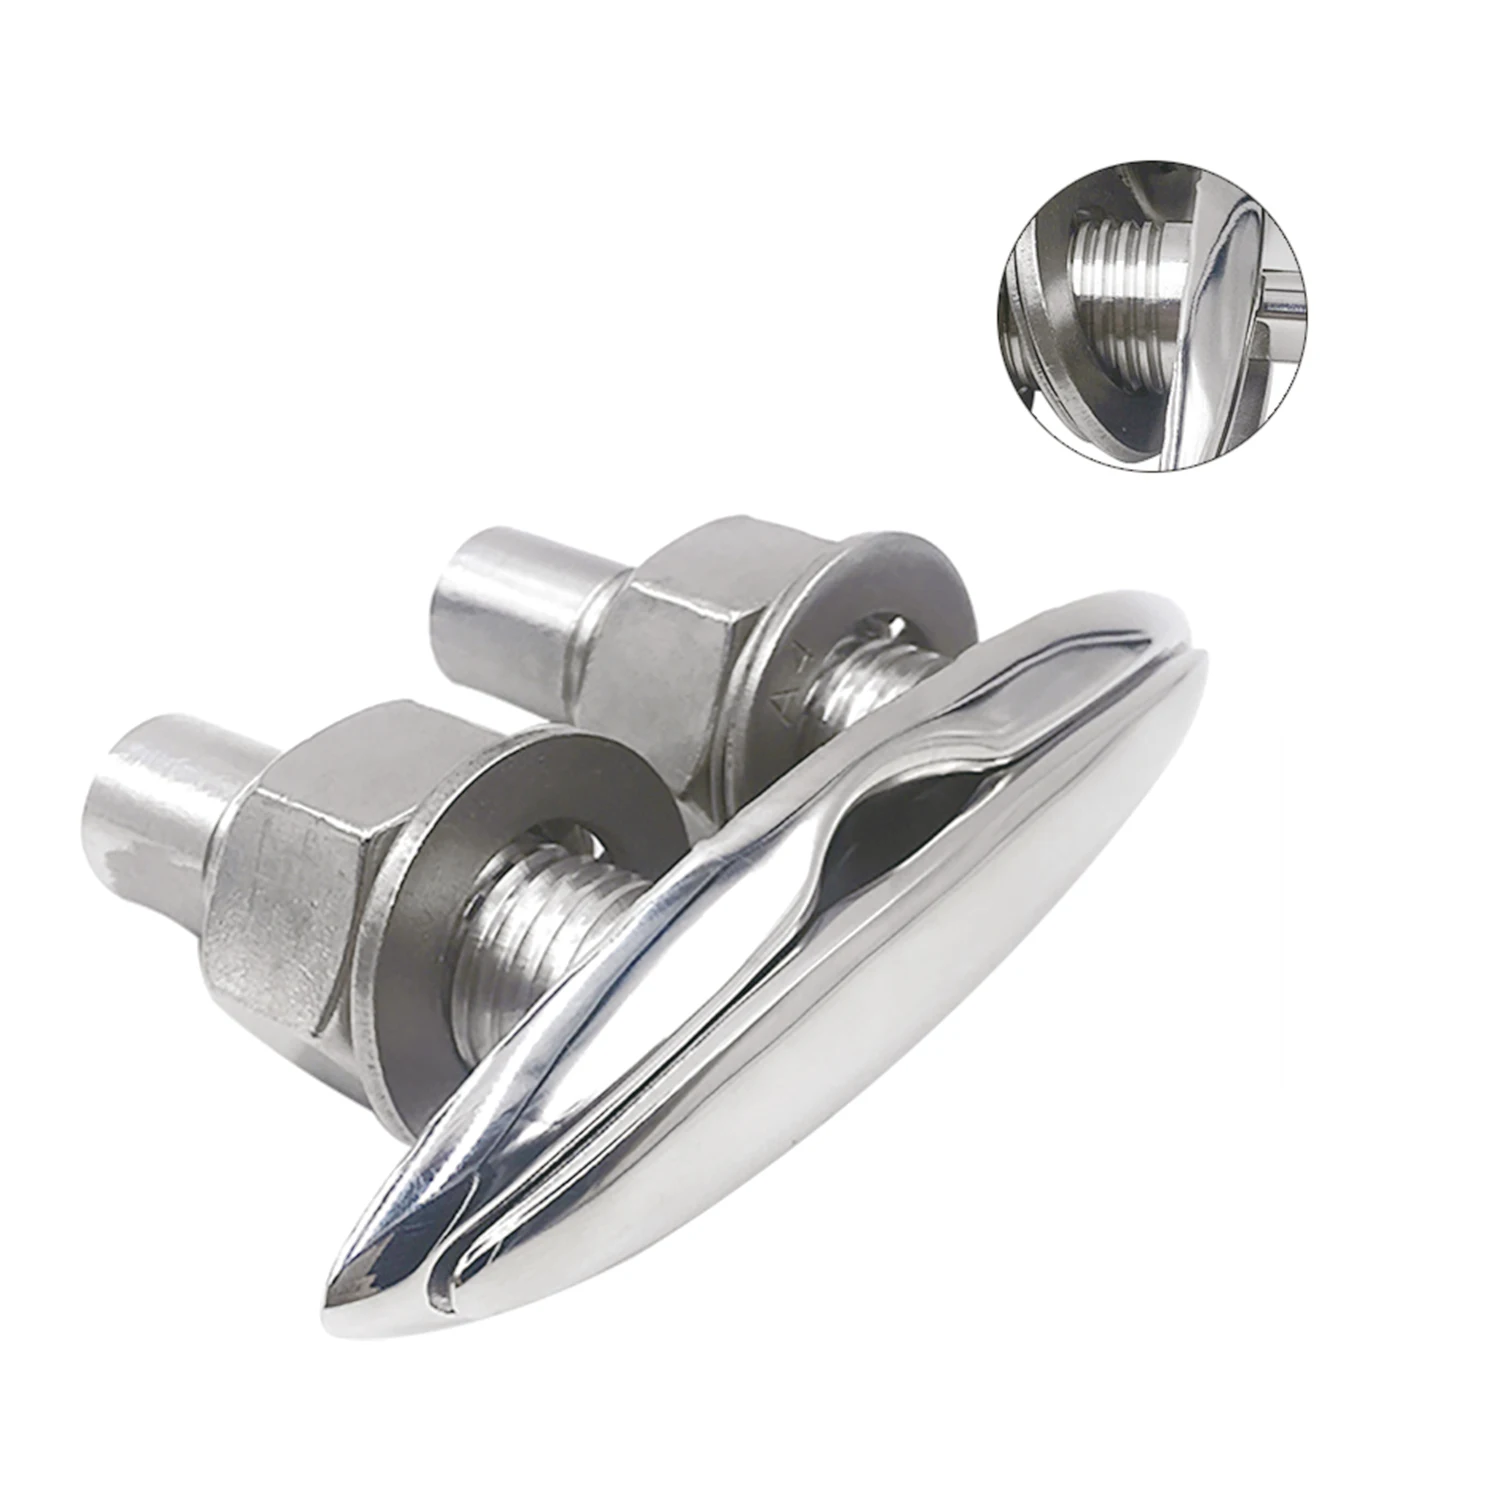 5 Inch Boat Pull Up Flush Mount Cleat Marine Stainless Steel 316 Retractable Pop Up Dock Deck Neat Mooring Cleat enlarge